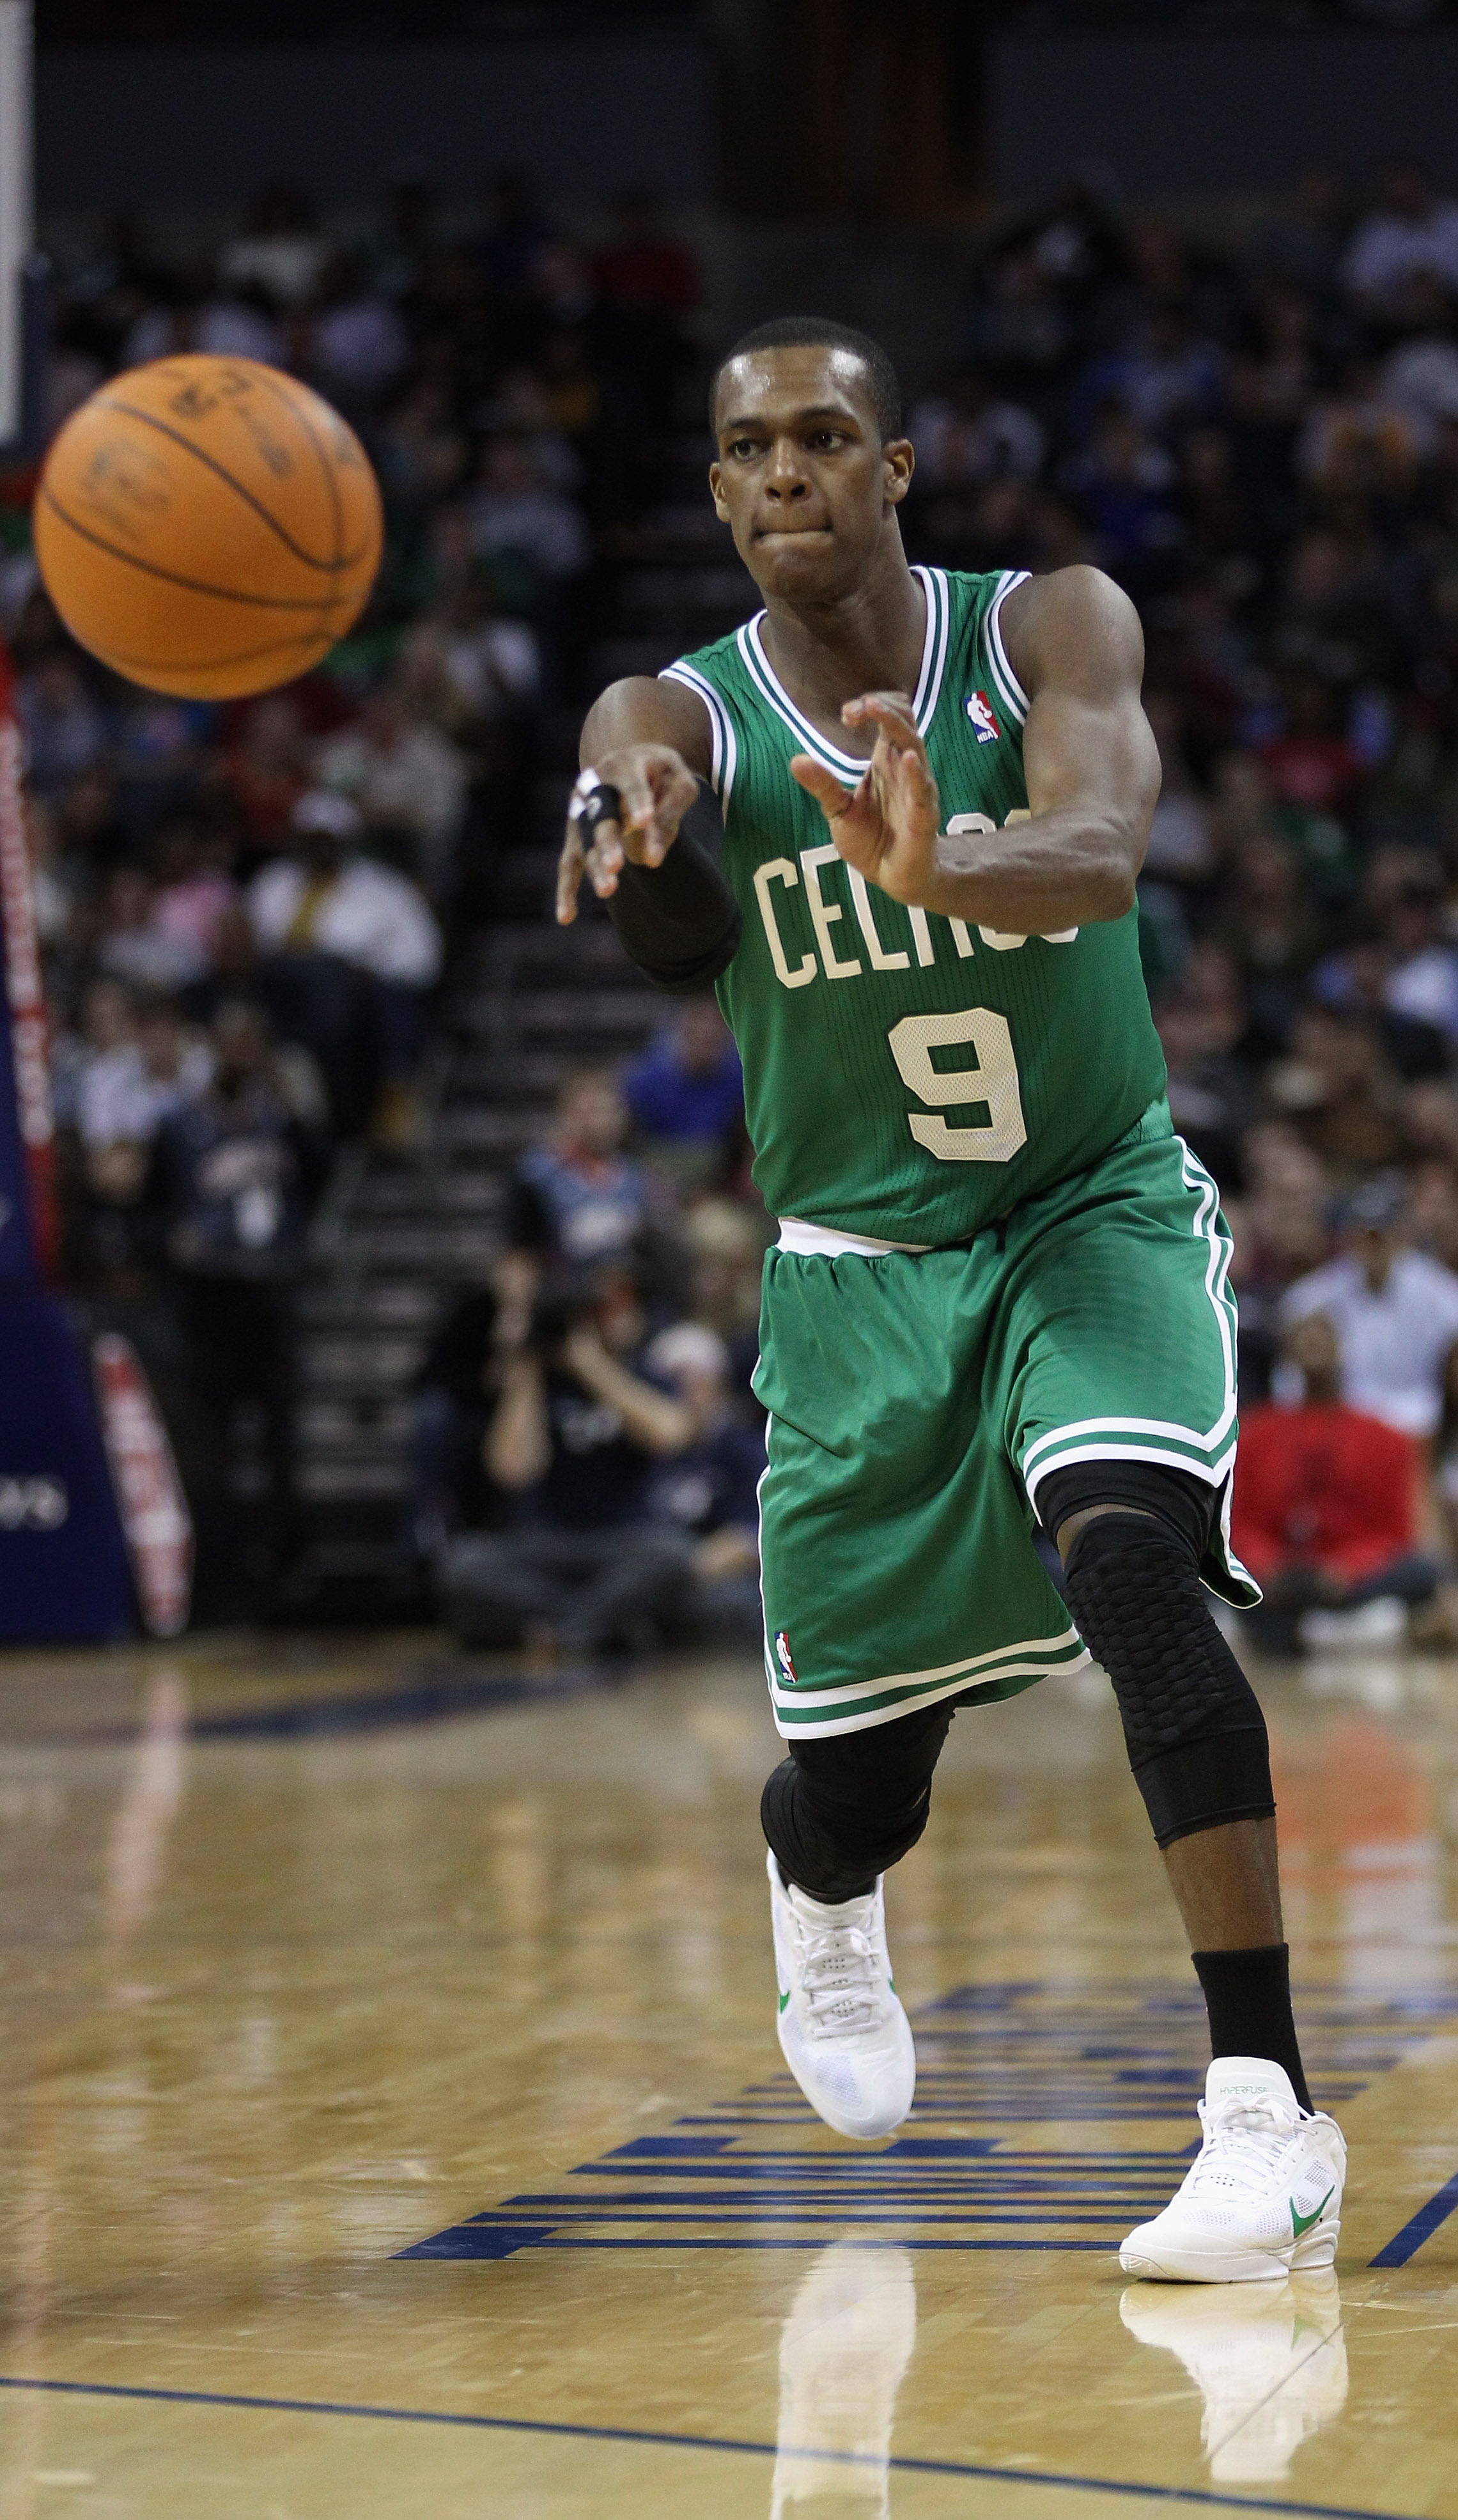 CHARLOTTE, NC - DECEMBER 11:  Rajon Rondo #9 of the Boston Celtics against the Charlotte Bobcats during their game at Time Warner Cable Arena on December 11, 2010 in Charlotte, North Carolina. NOTE TO USER: User expressly acknowledges and agrees that, by